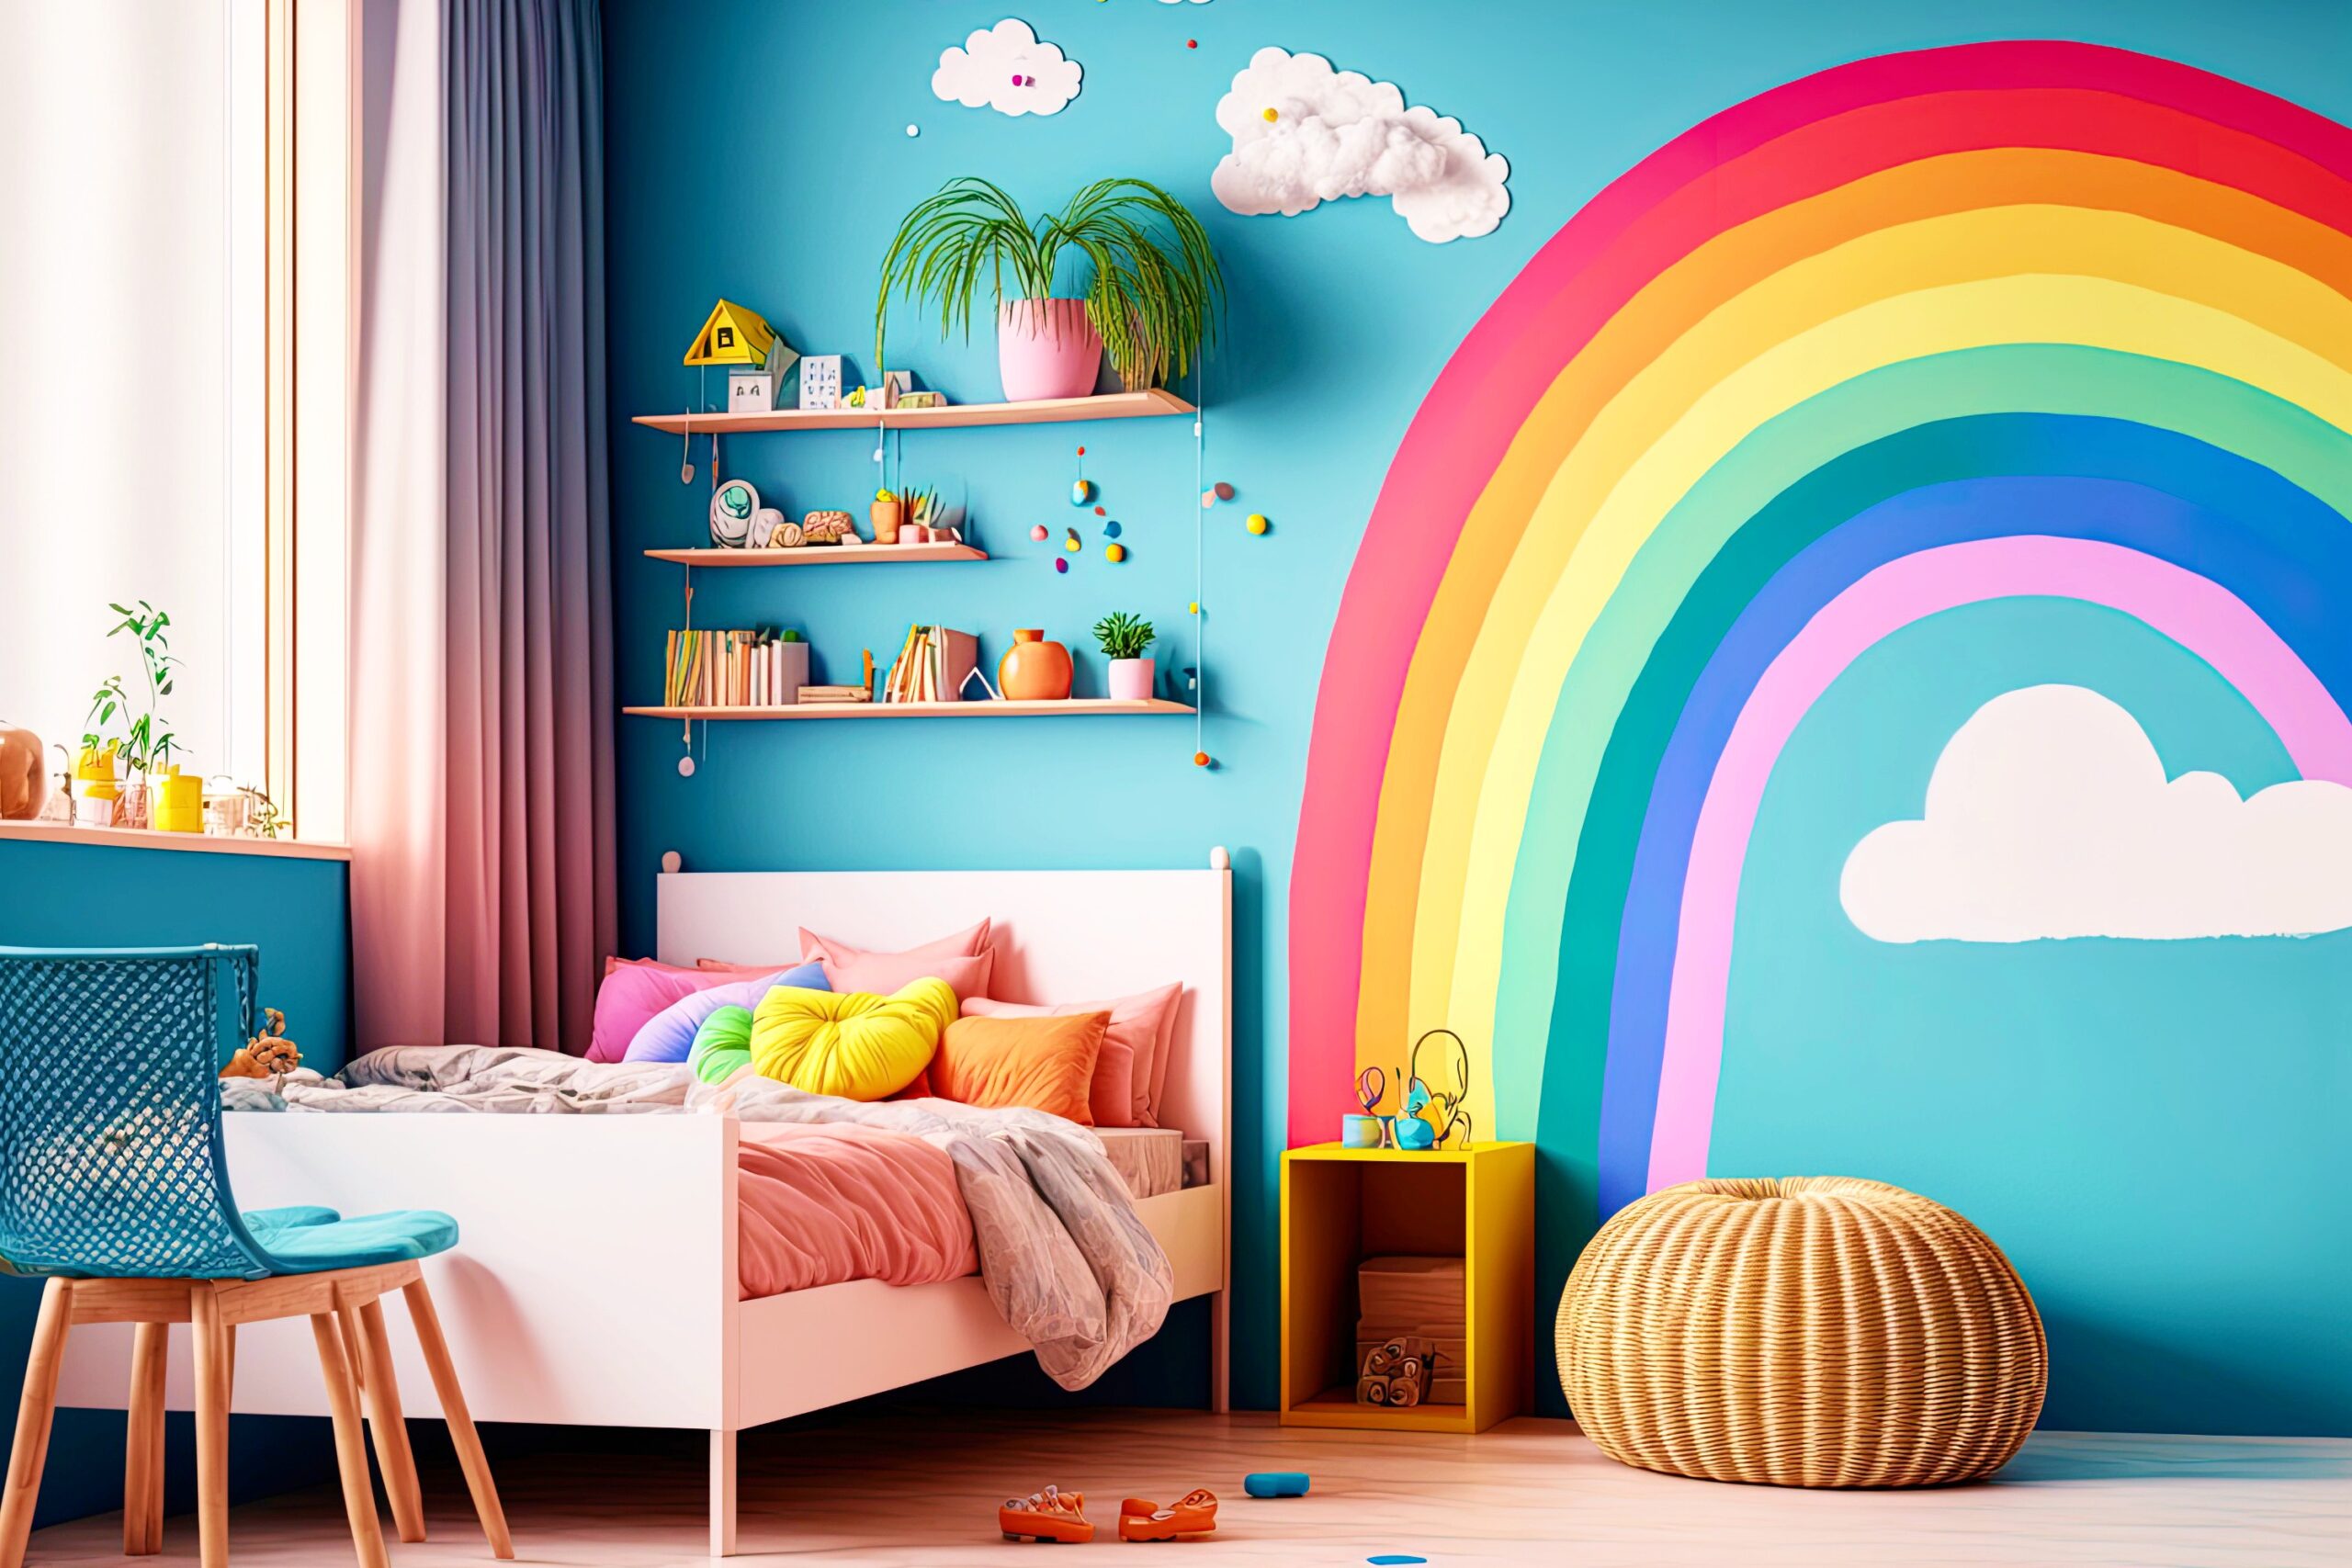 <img src="colourful.jpg" alt="colourful bedroom trends for sprng"/> 